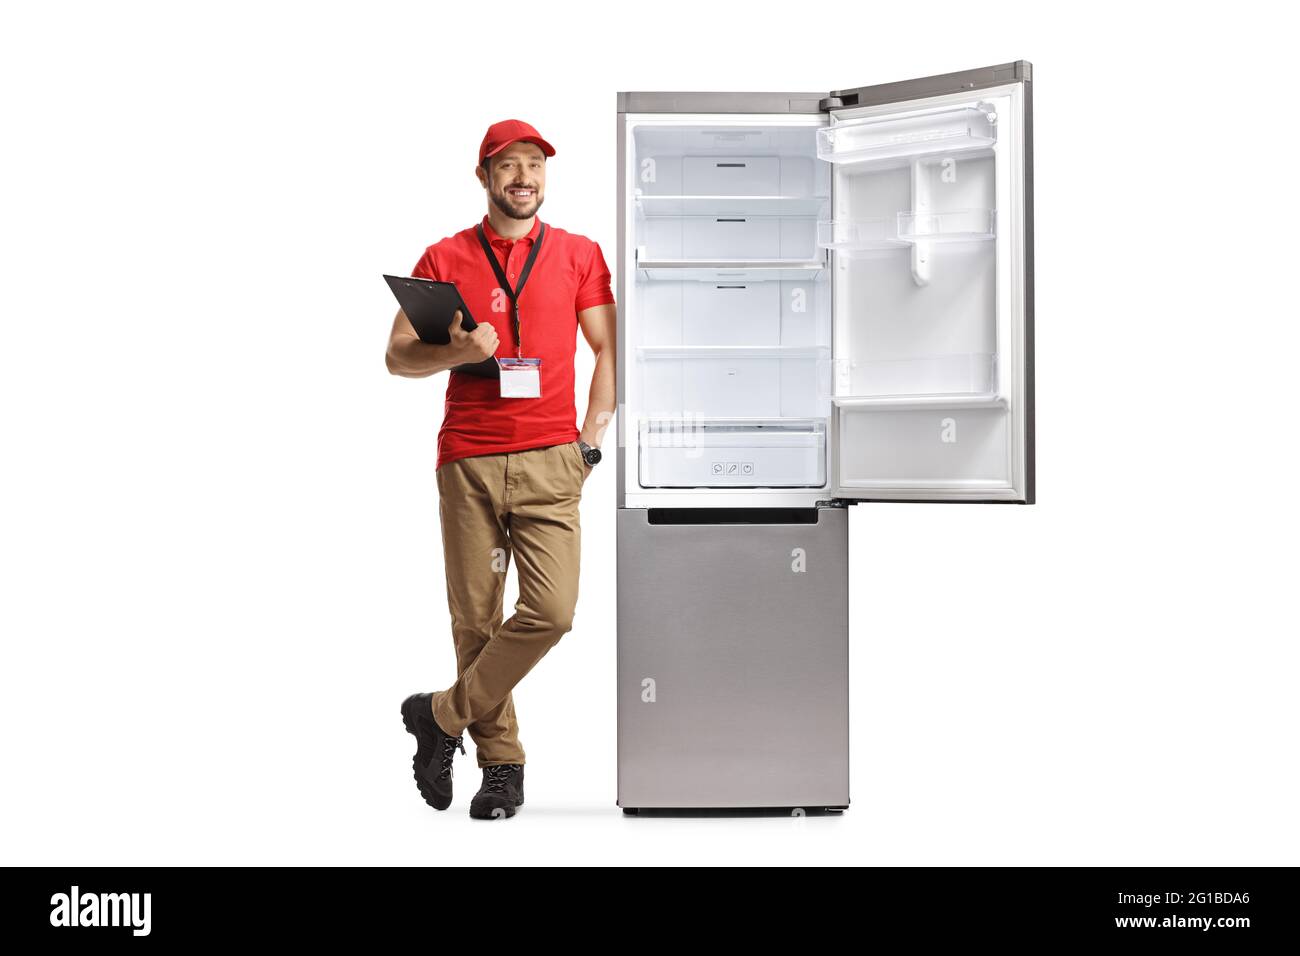 Male store assistant leaning on a fridge and holding a clipboard isolated on white background Stock Photo